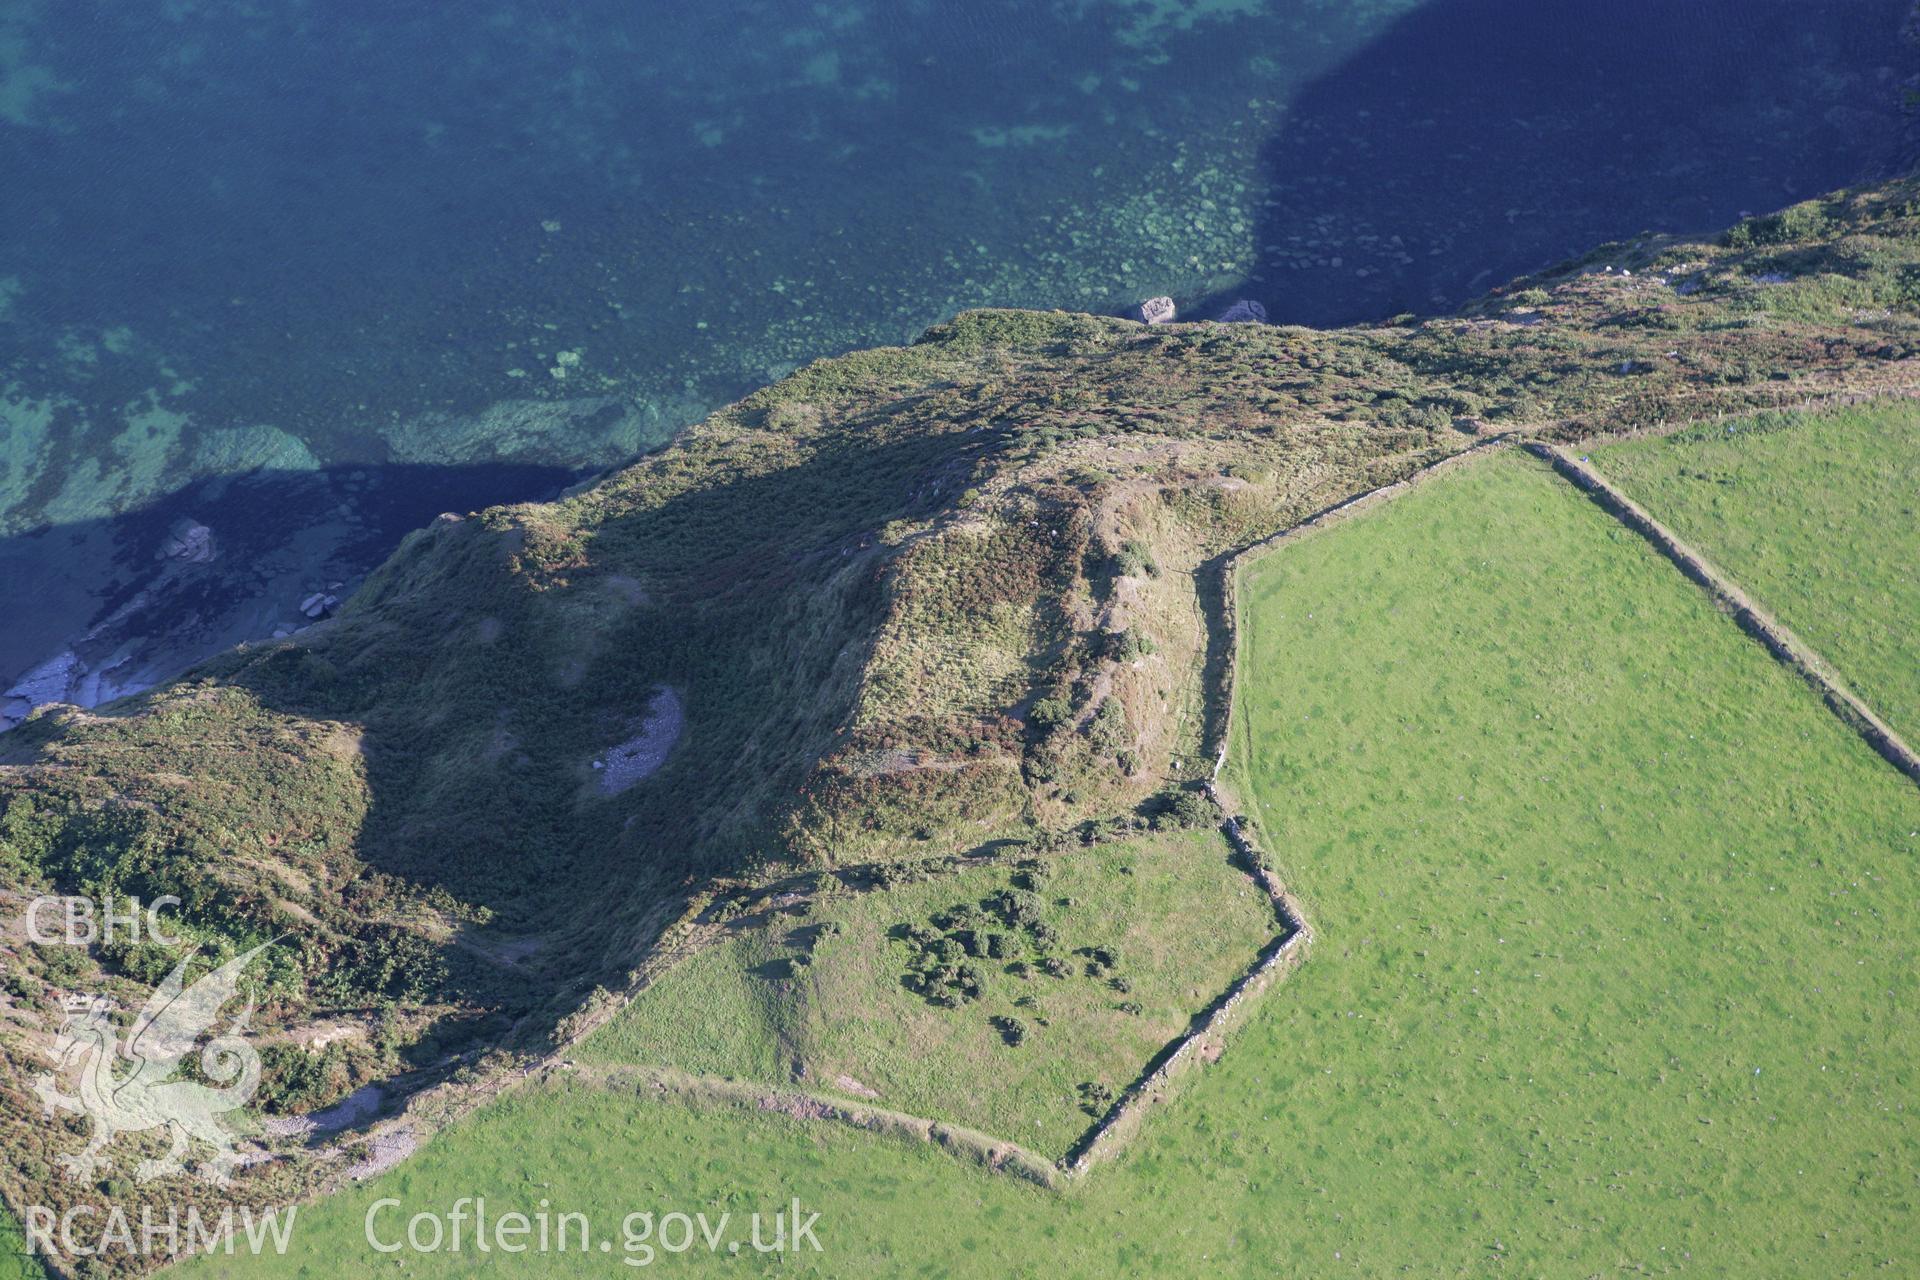 RCAHMW colour oblique aerial photograph of Pared Mawr Camp with promontory fort, Porth Ceiriad. Taken on 06 September 2007 by Toby Driver